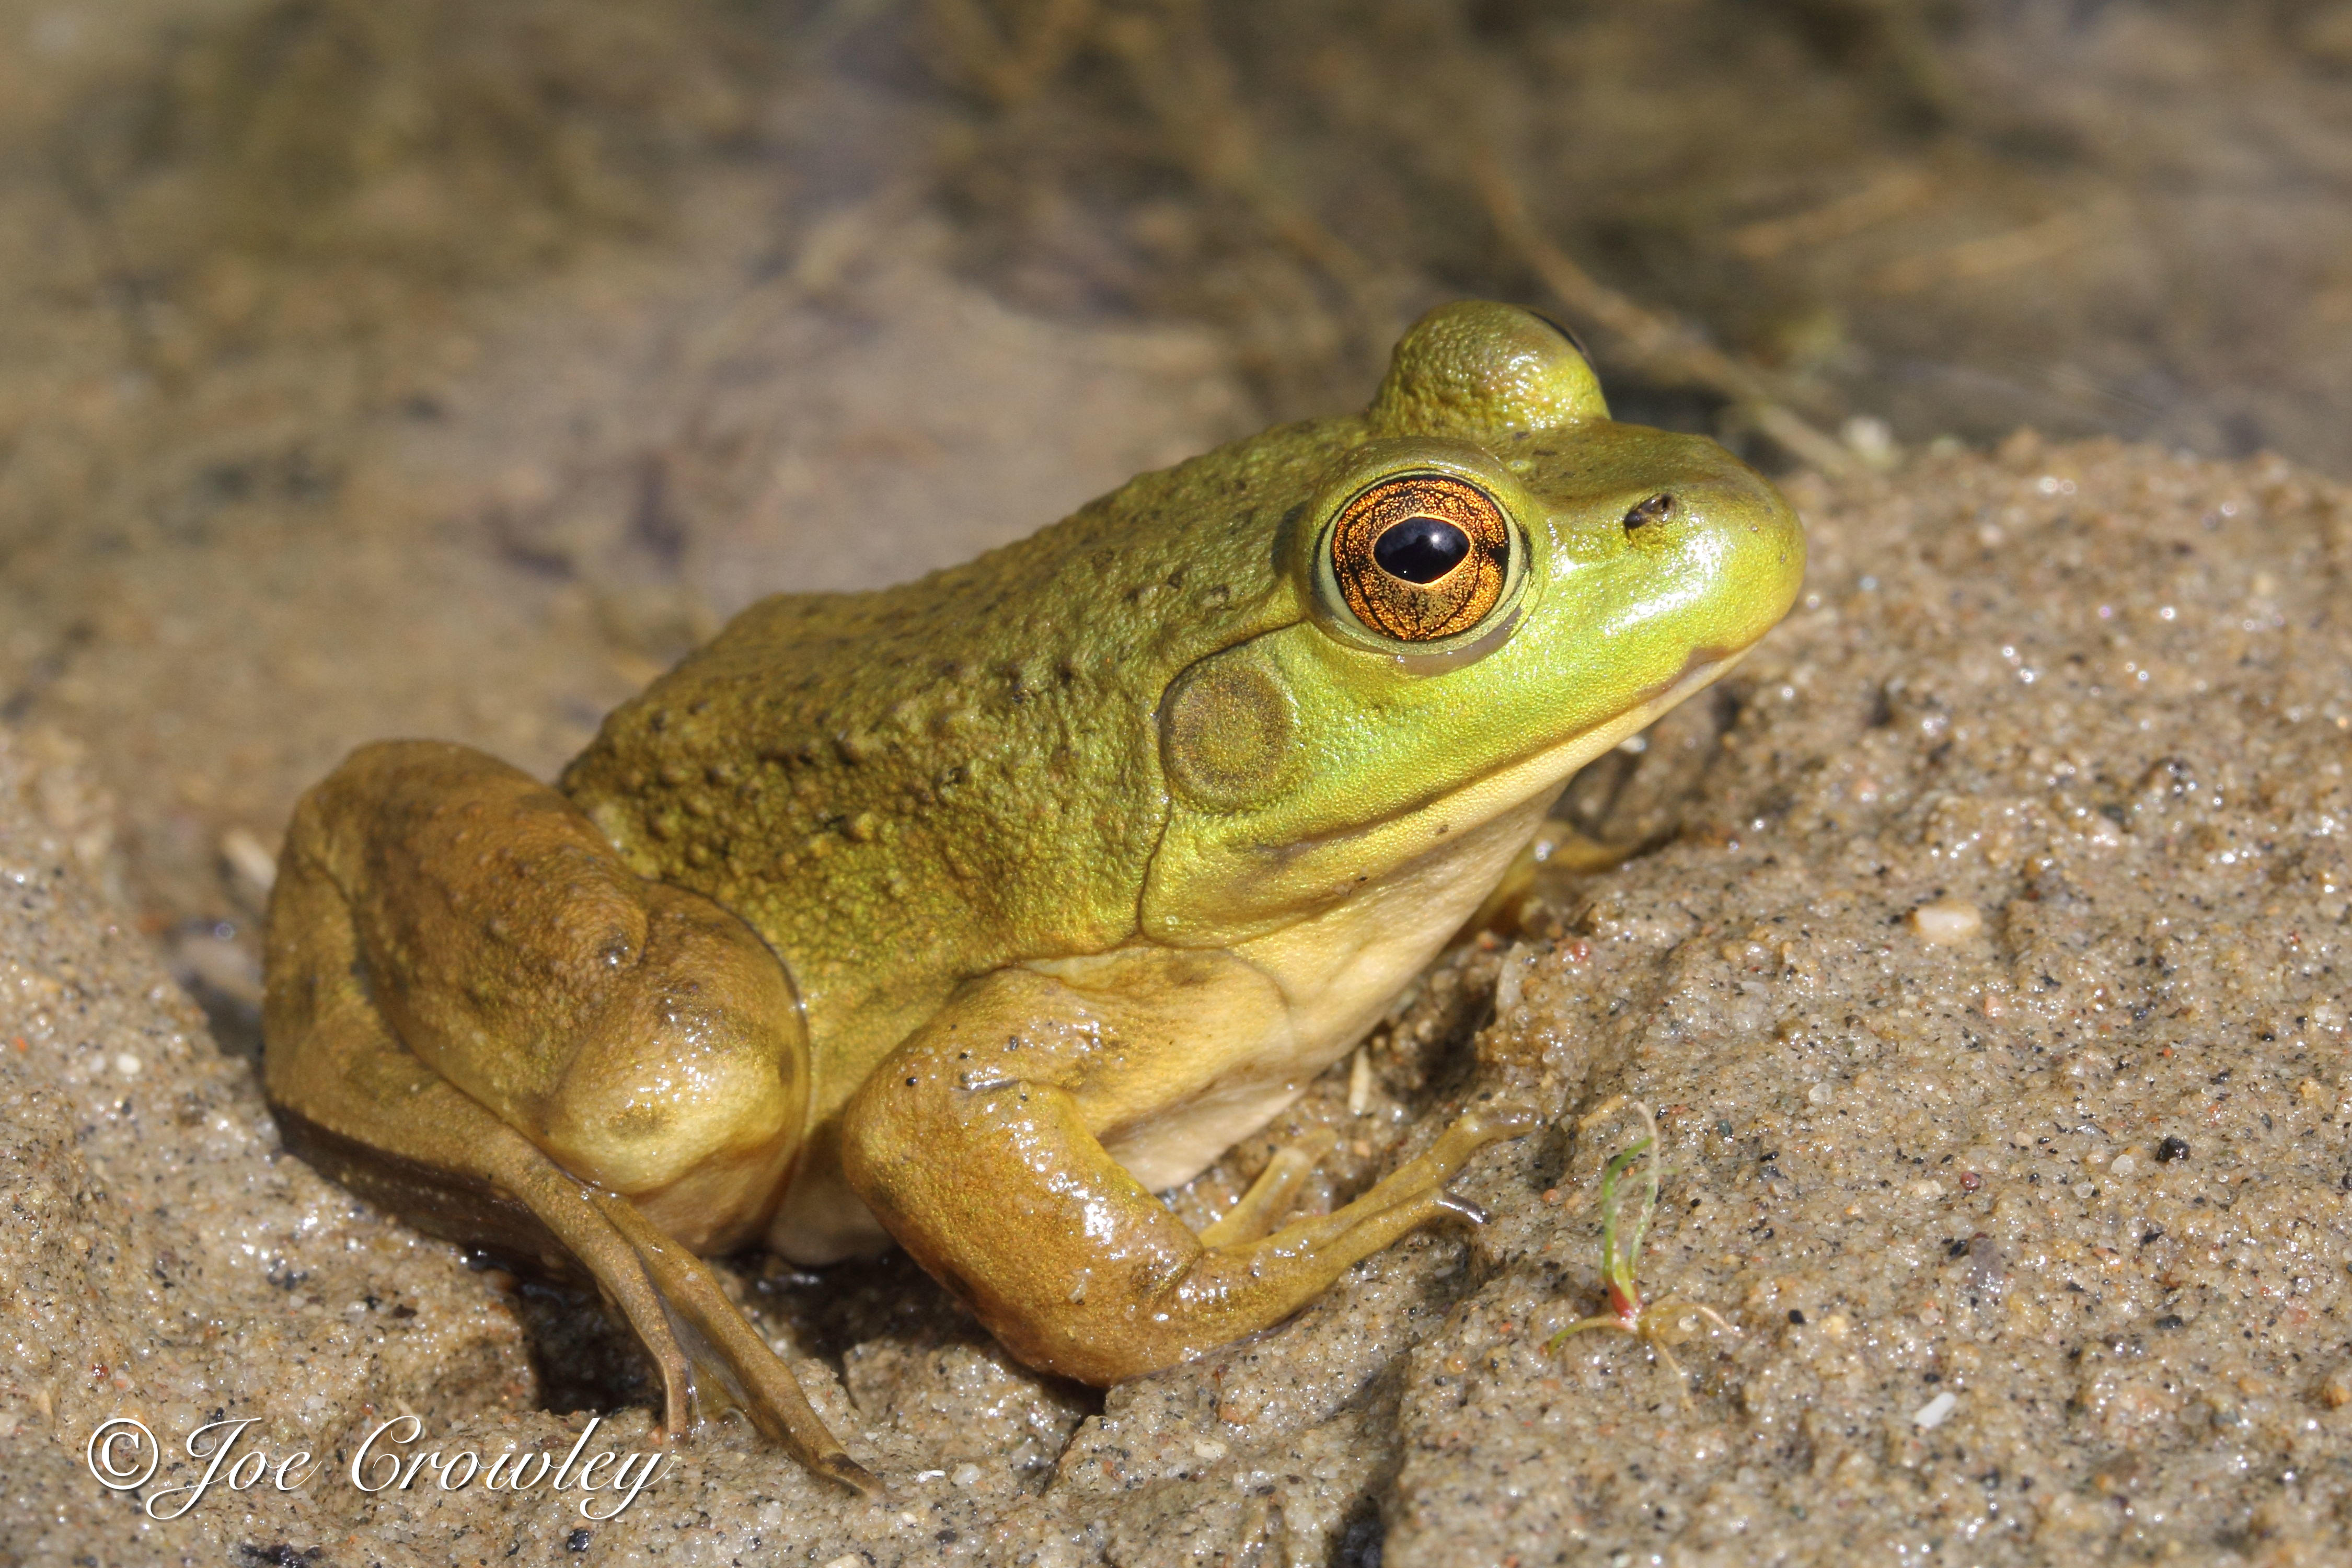 American bullfrogs are the largest frog species in North America.